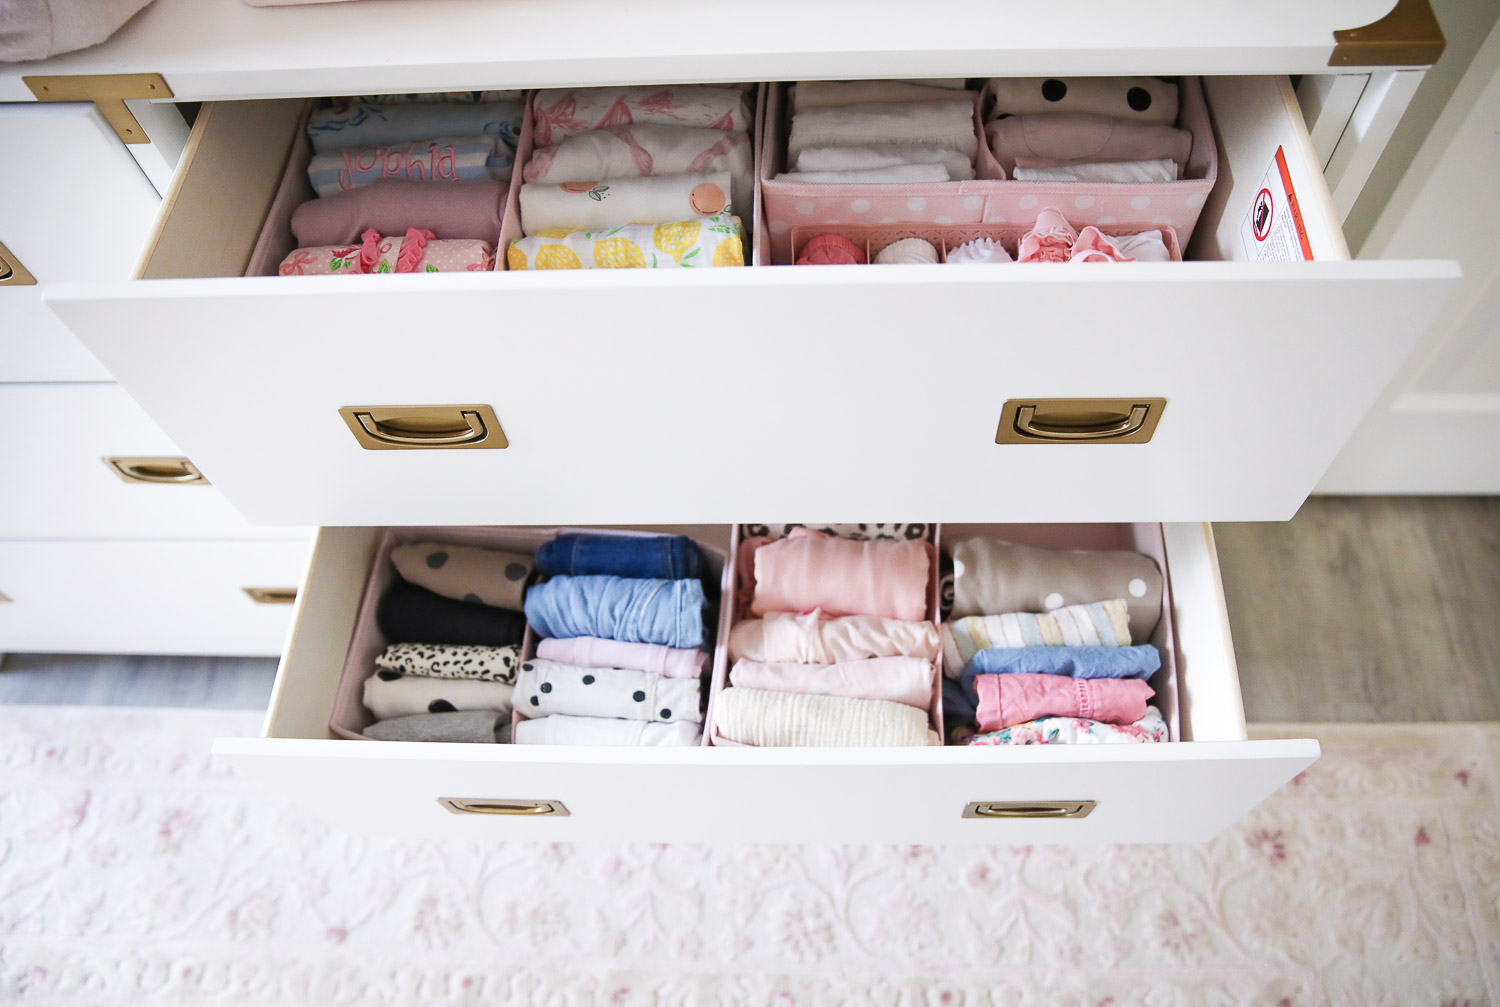 walmart kids home organization must haves, playroom organization ideas, emily gemma, the sweetest thing blog | Playroom Organization by popular US life and style blog, The Sweetest Thing: image of a dresser drawer organized with Walmart mDesign Fabric Child/Kids Drawer Organizer and Walmart youlaike 5 Cells Plastic Organizer Storage Box Tie Bra Socks Drawer Cosmetic Divider.